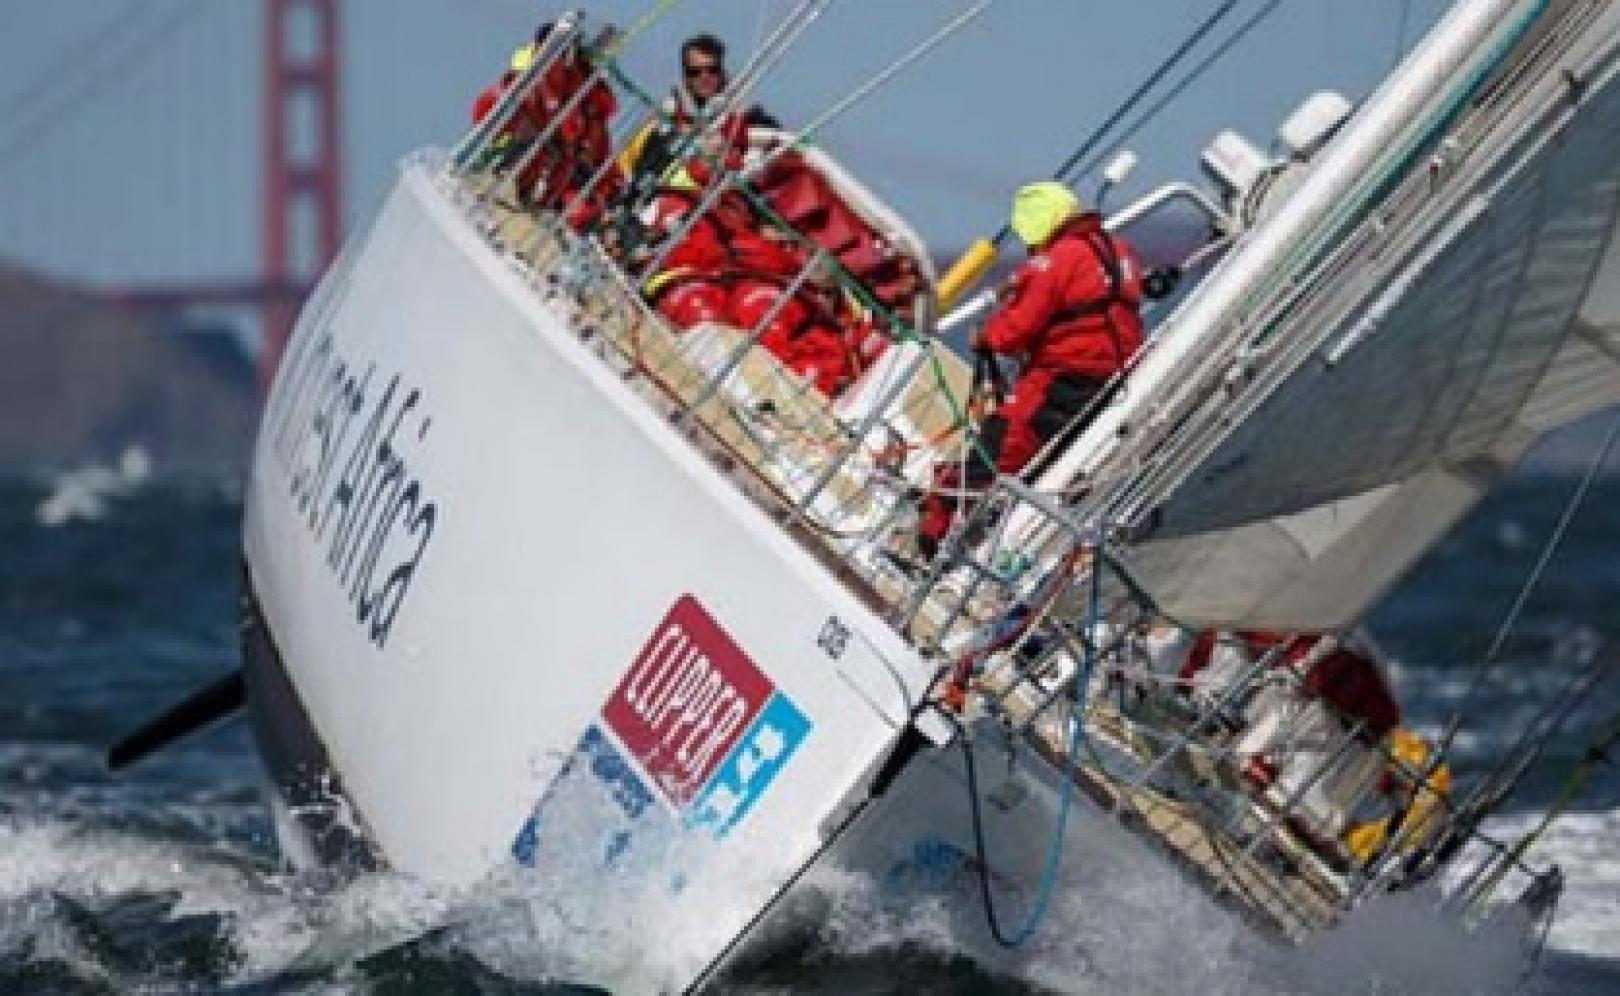 Sail boat team participating in the 10th round-the-world Clipper Race